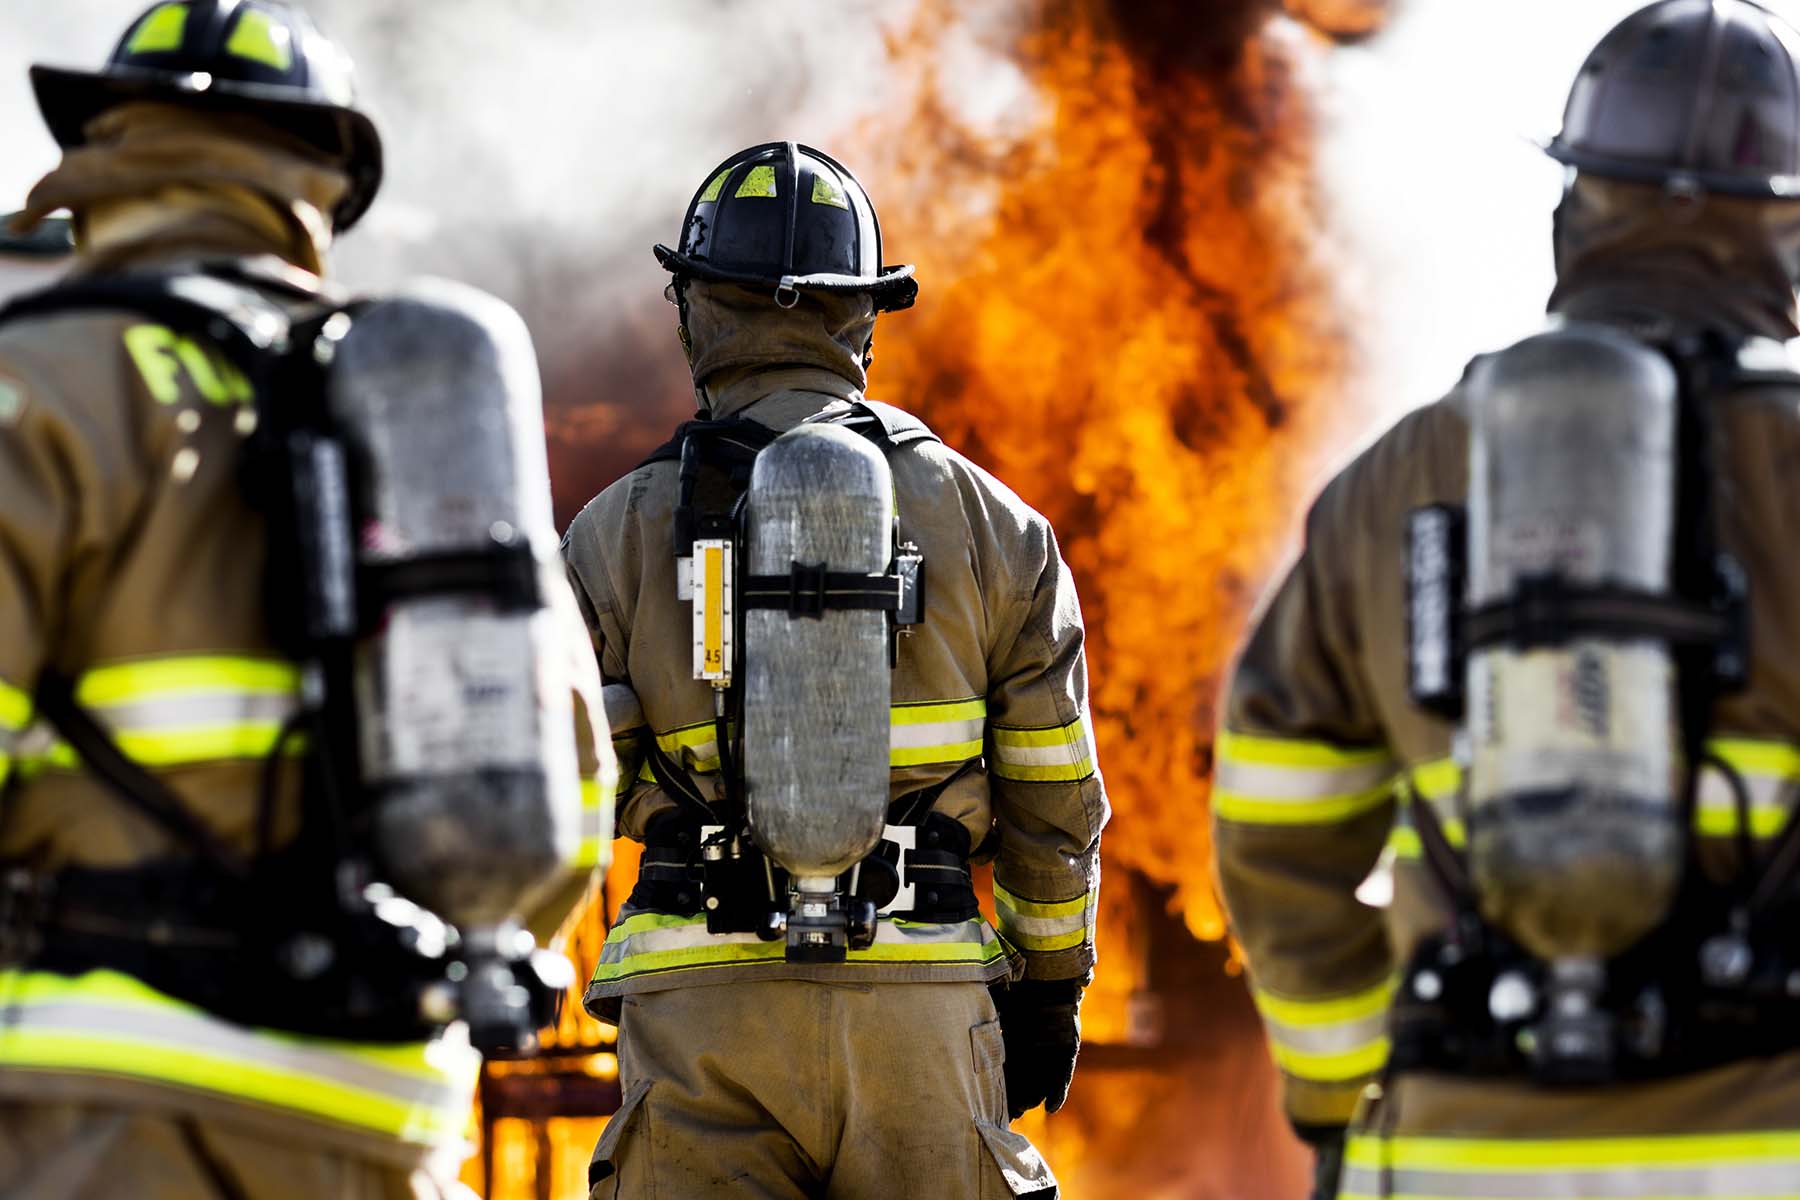 Fire & Rescue Equipment for Emergency Response Professionals